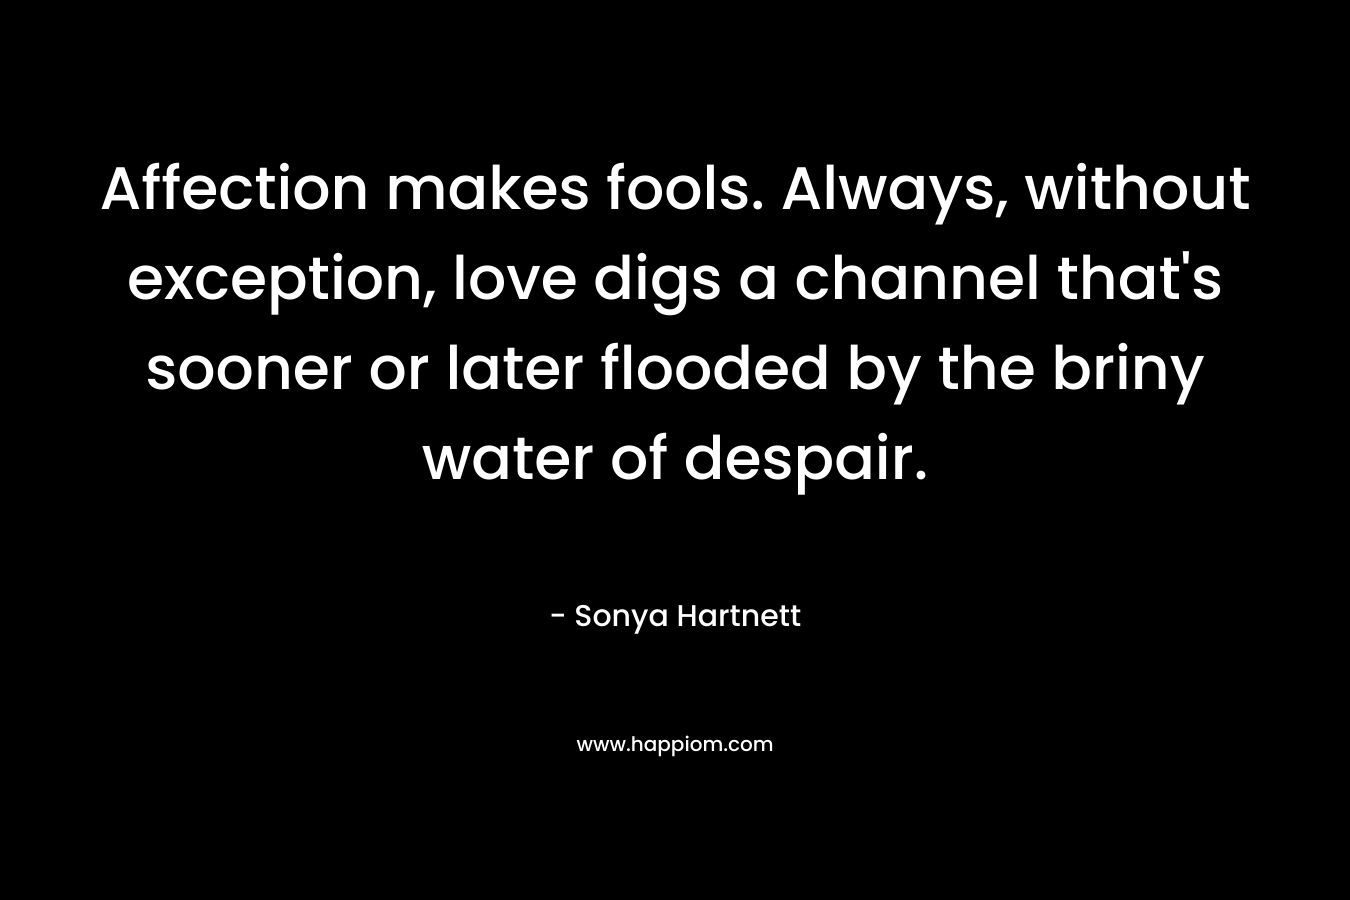 Affection makes fools. Always, without exception, love digs a channel that's sooner or later flooded by the briny water of despair.